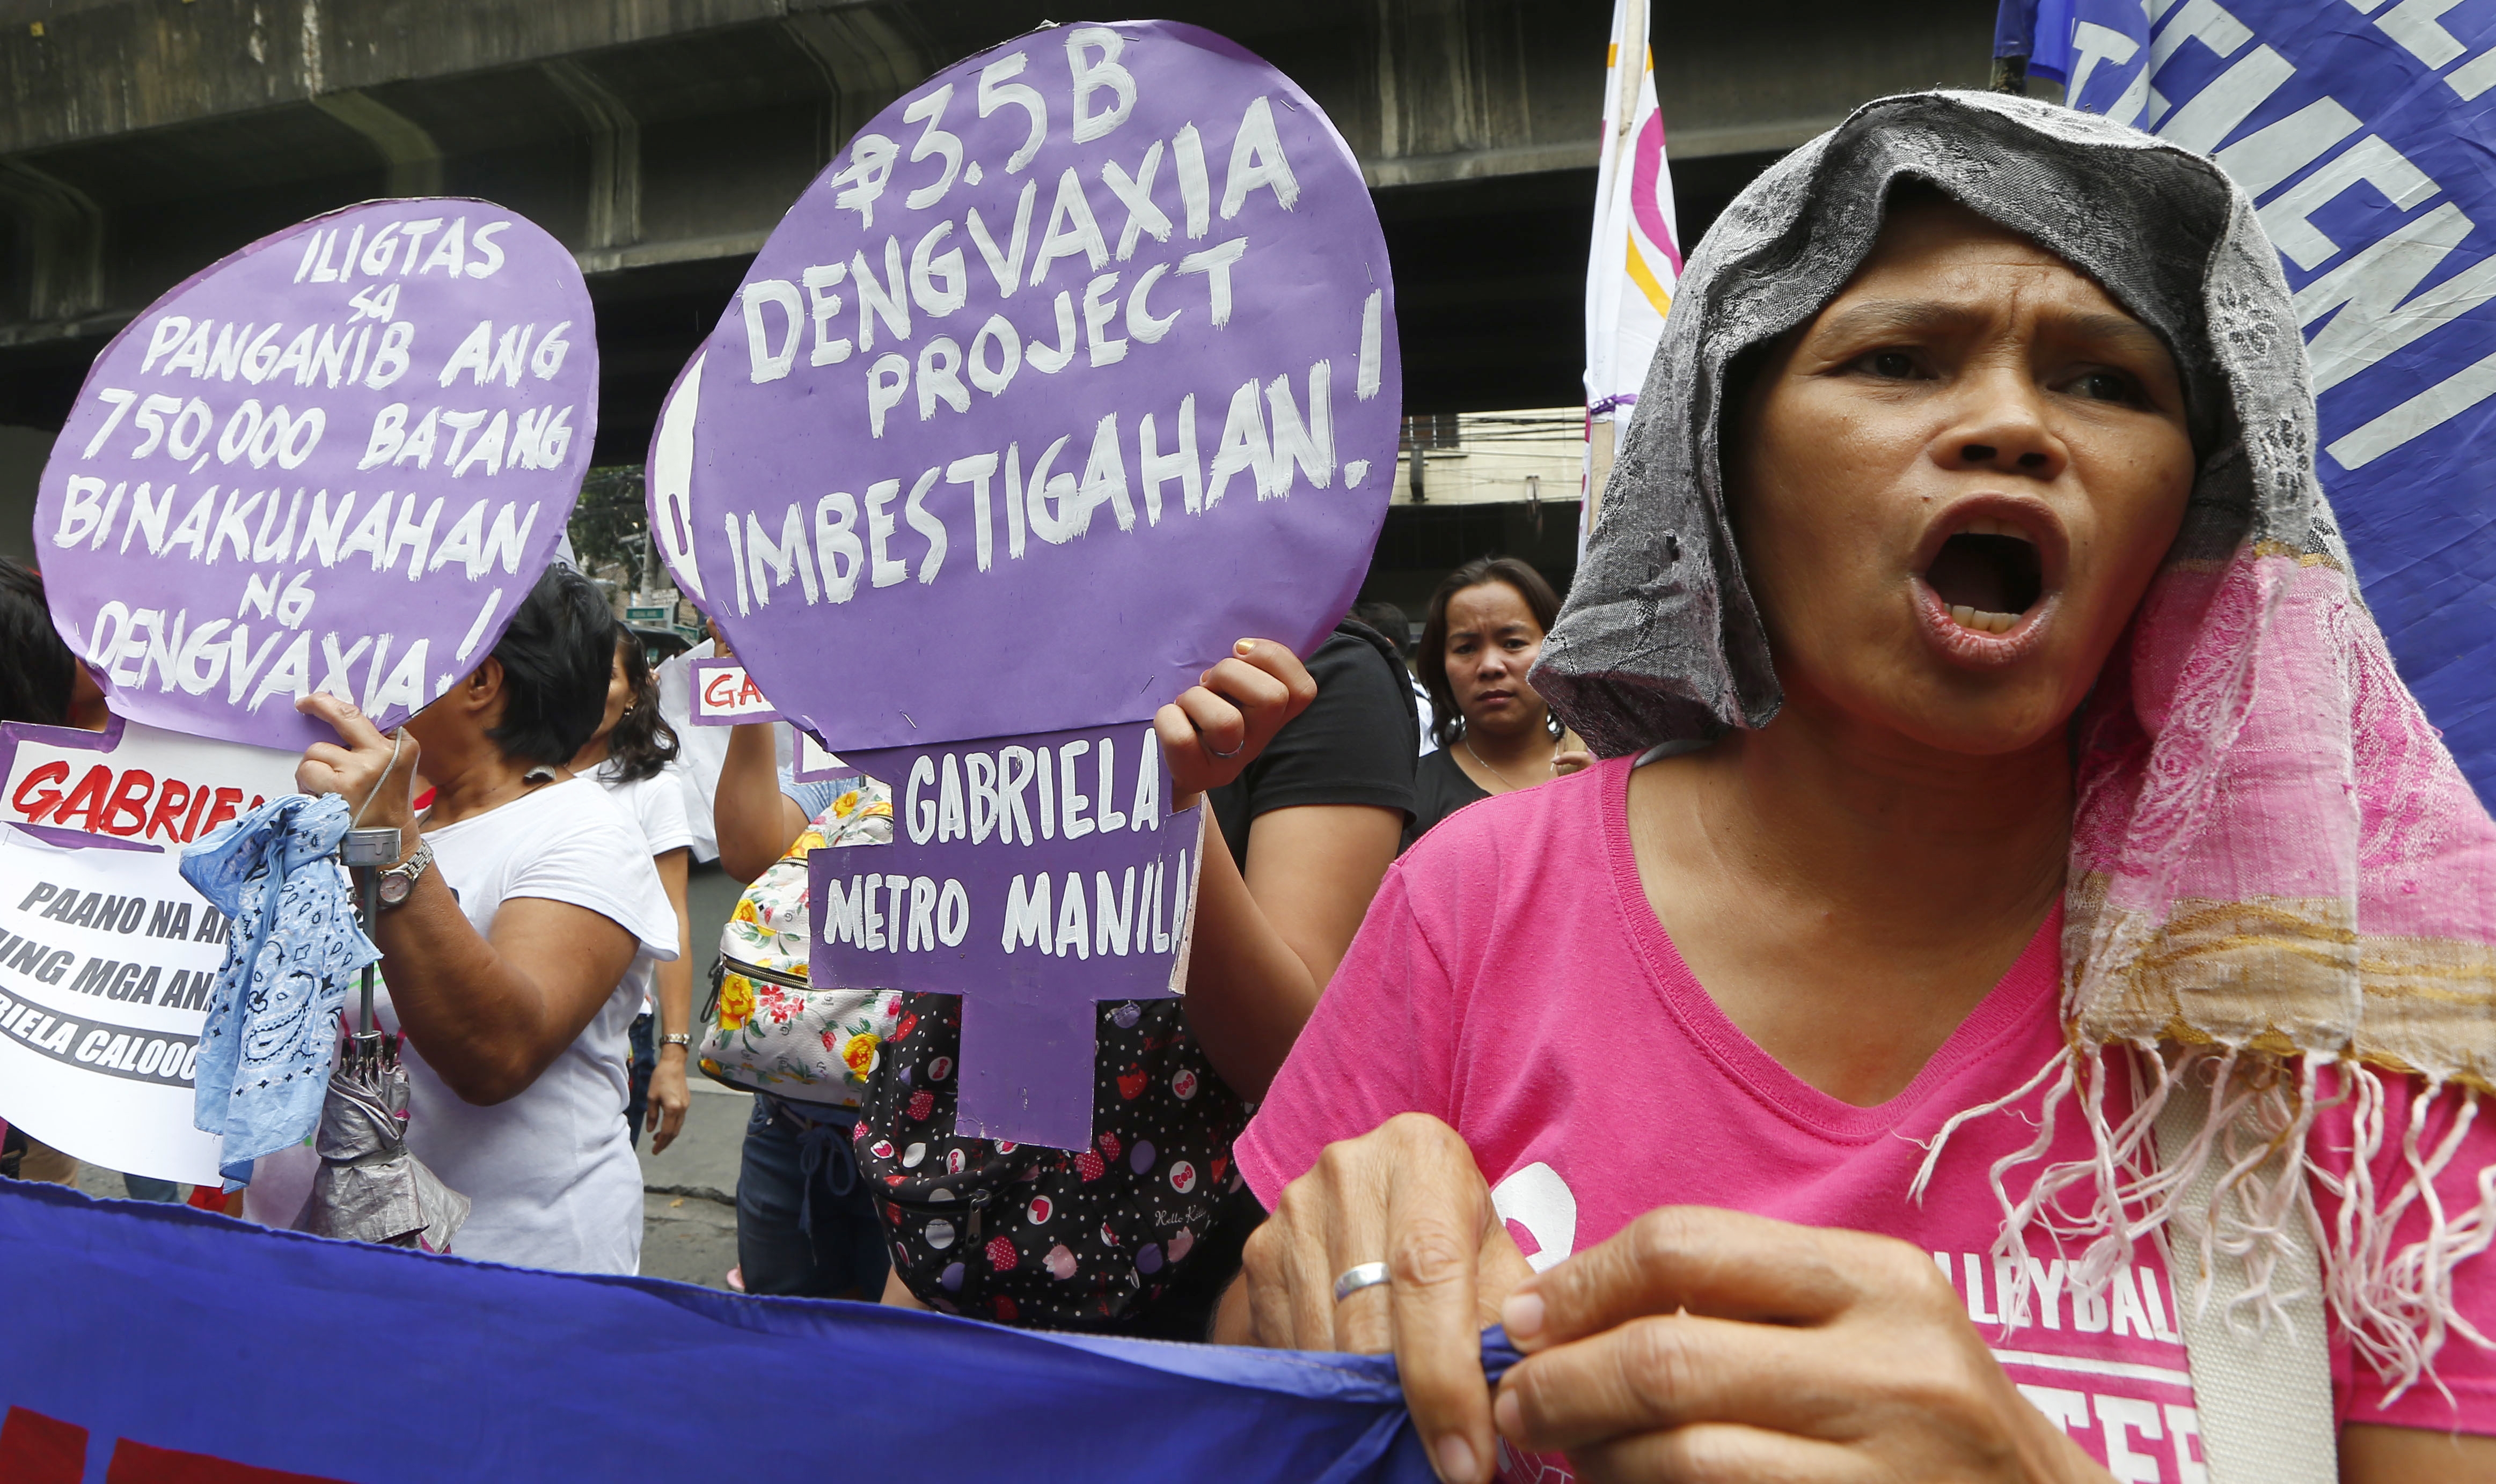 Protesters shout slogans during a rally outside the Department of Health to demand accountability to Government officials involved in the controversial immunization of  the anti-dengue vaccine Dengvaxia to more than 700,000 Filipino children Tuesday, Dec. 5, 2017 in Manila, Philippines. The controversial vaccine, manufactured by Sanofi Pasteur was put on hold by the Philippines last week after new study findings showed it posed risks of severe cases in people without previous infection. The drug was recalled Tuesday from local health centers. The sign in center reads: Investigate The 3.5 Billion-Peso Dengvaxia Project.! (AP Photo/Bullit Marquez)